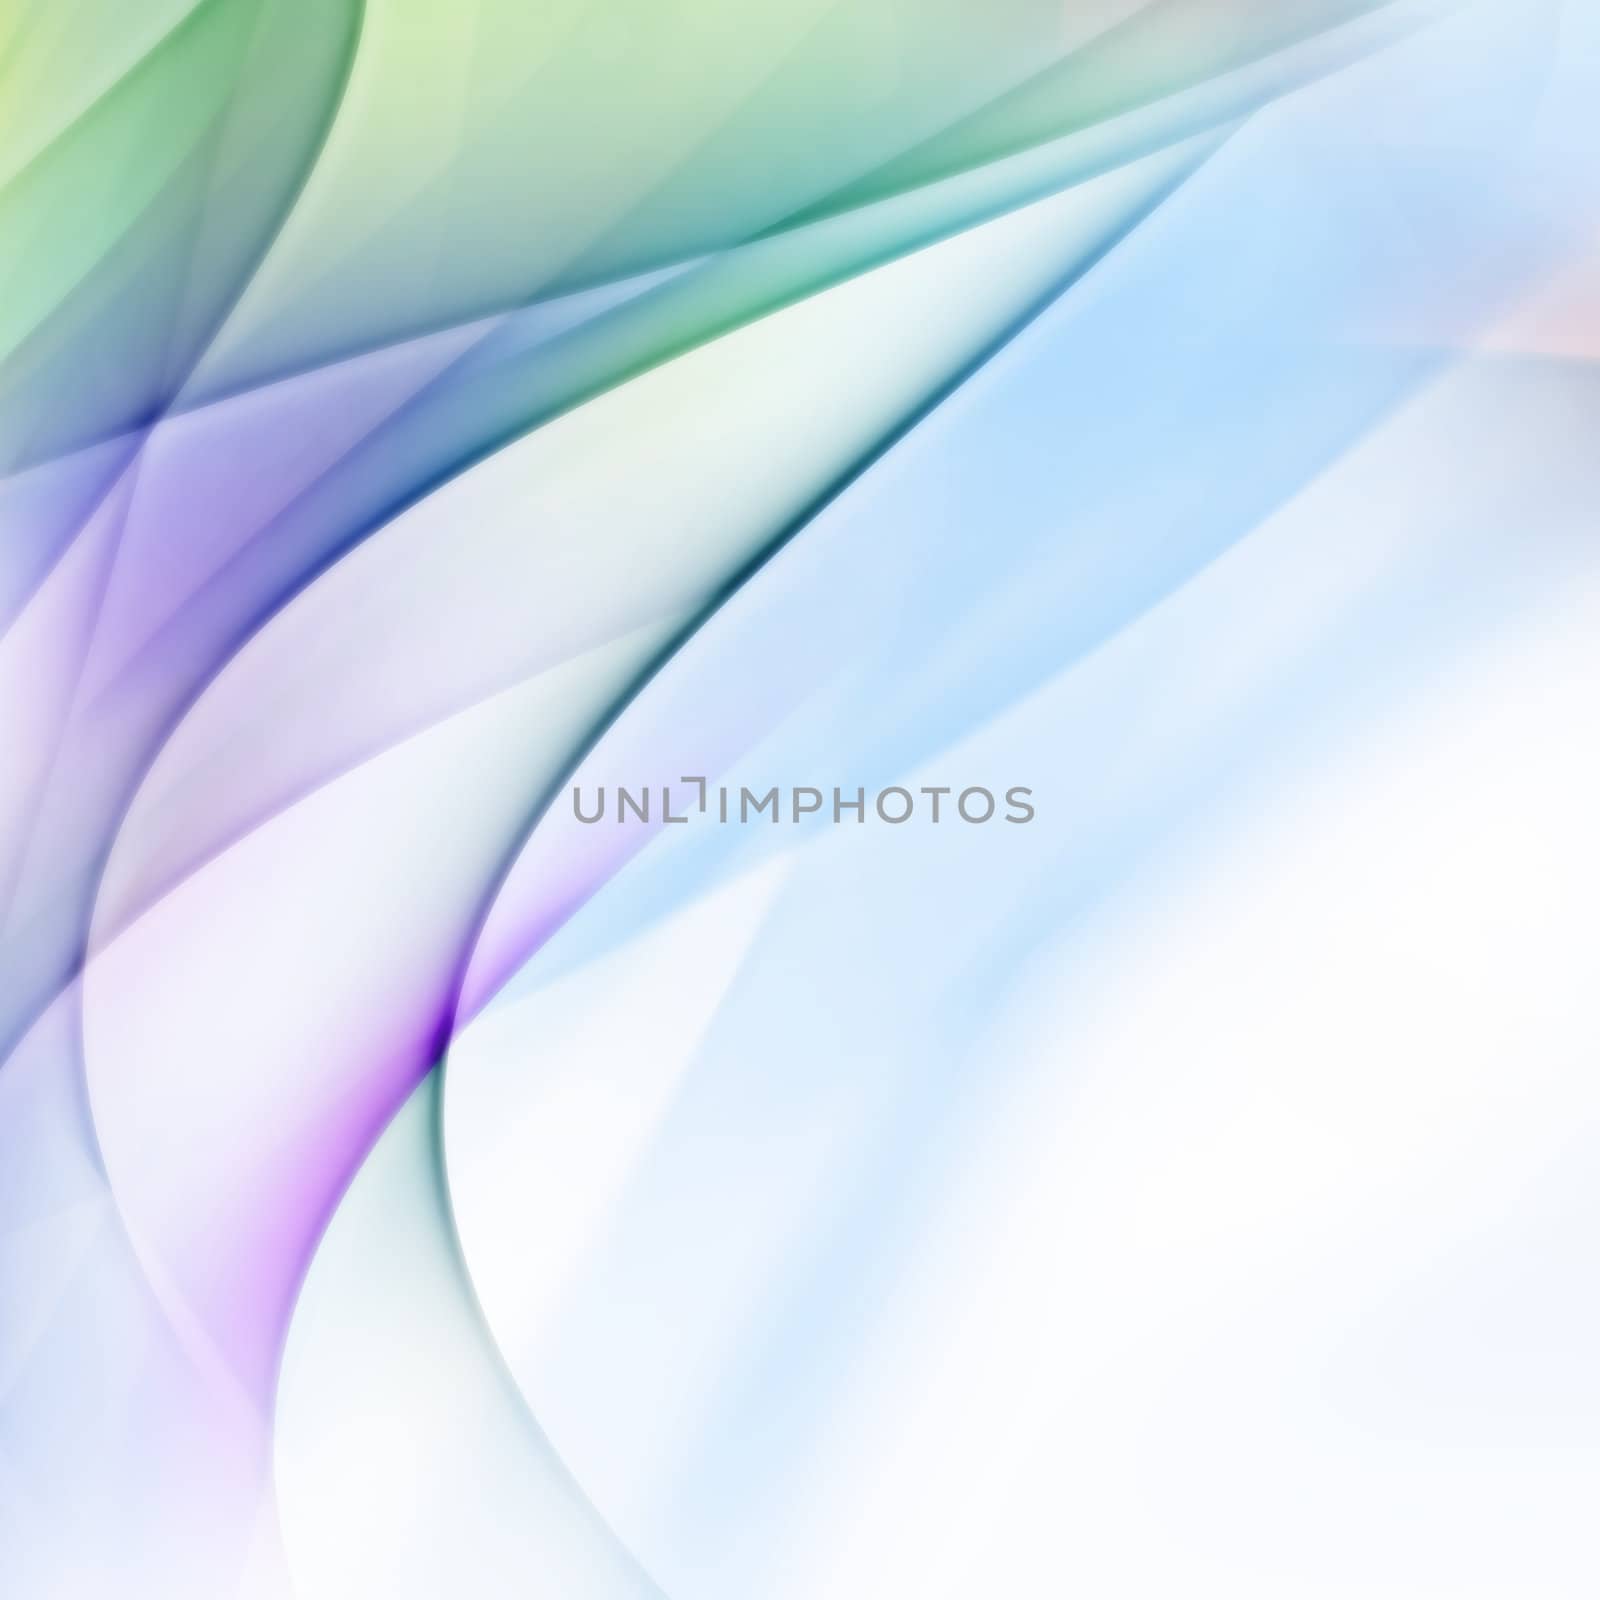 abstract active stylized waves with blur effect